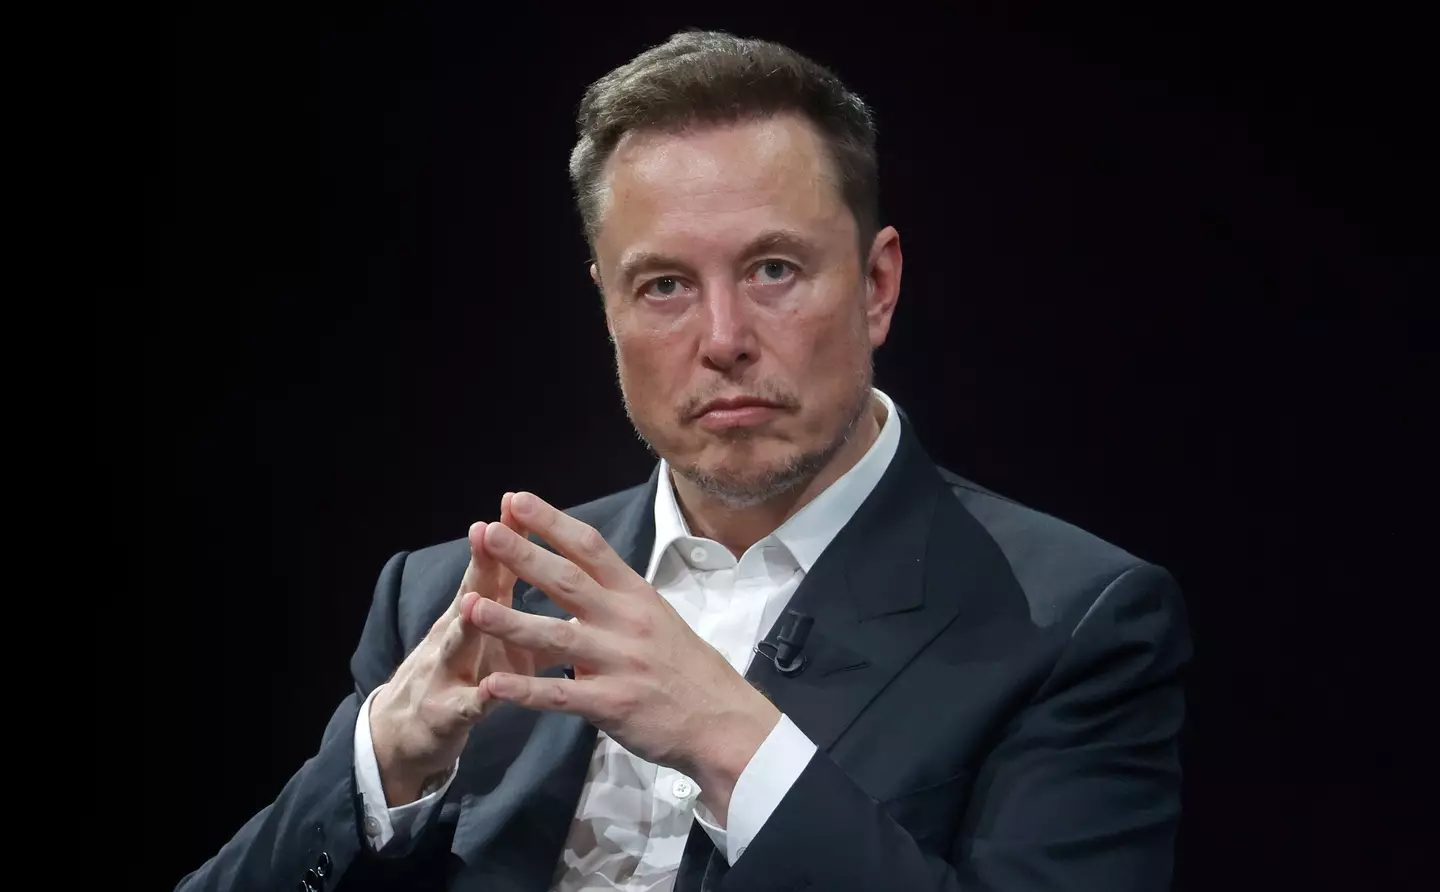 Elon Musk and his father fell out over the child his father had.